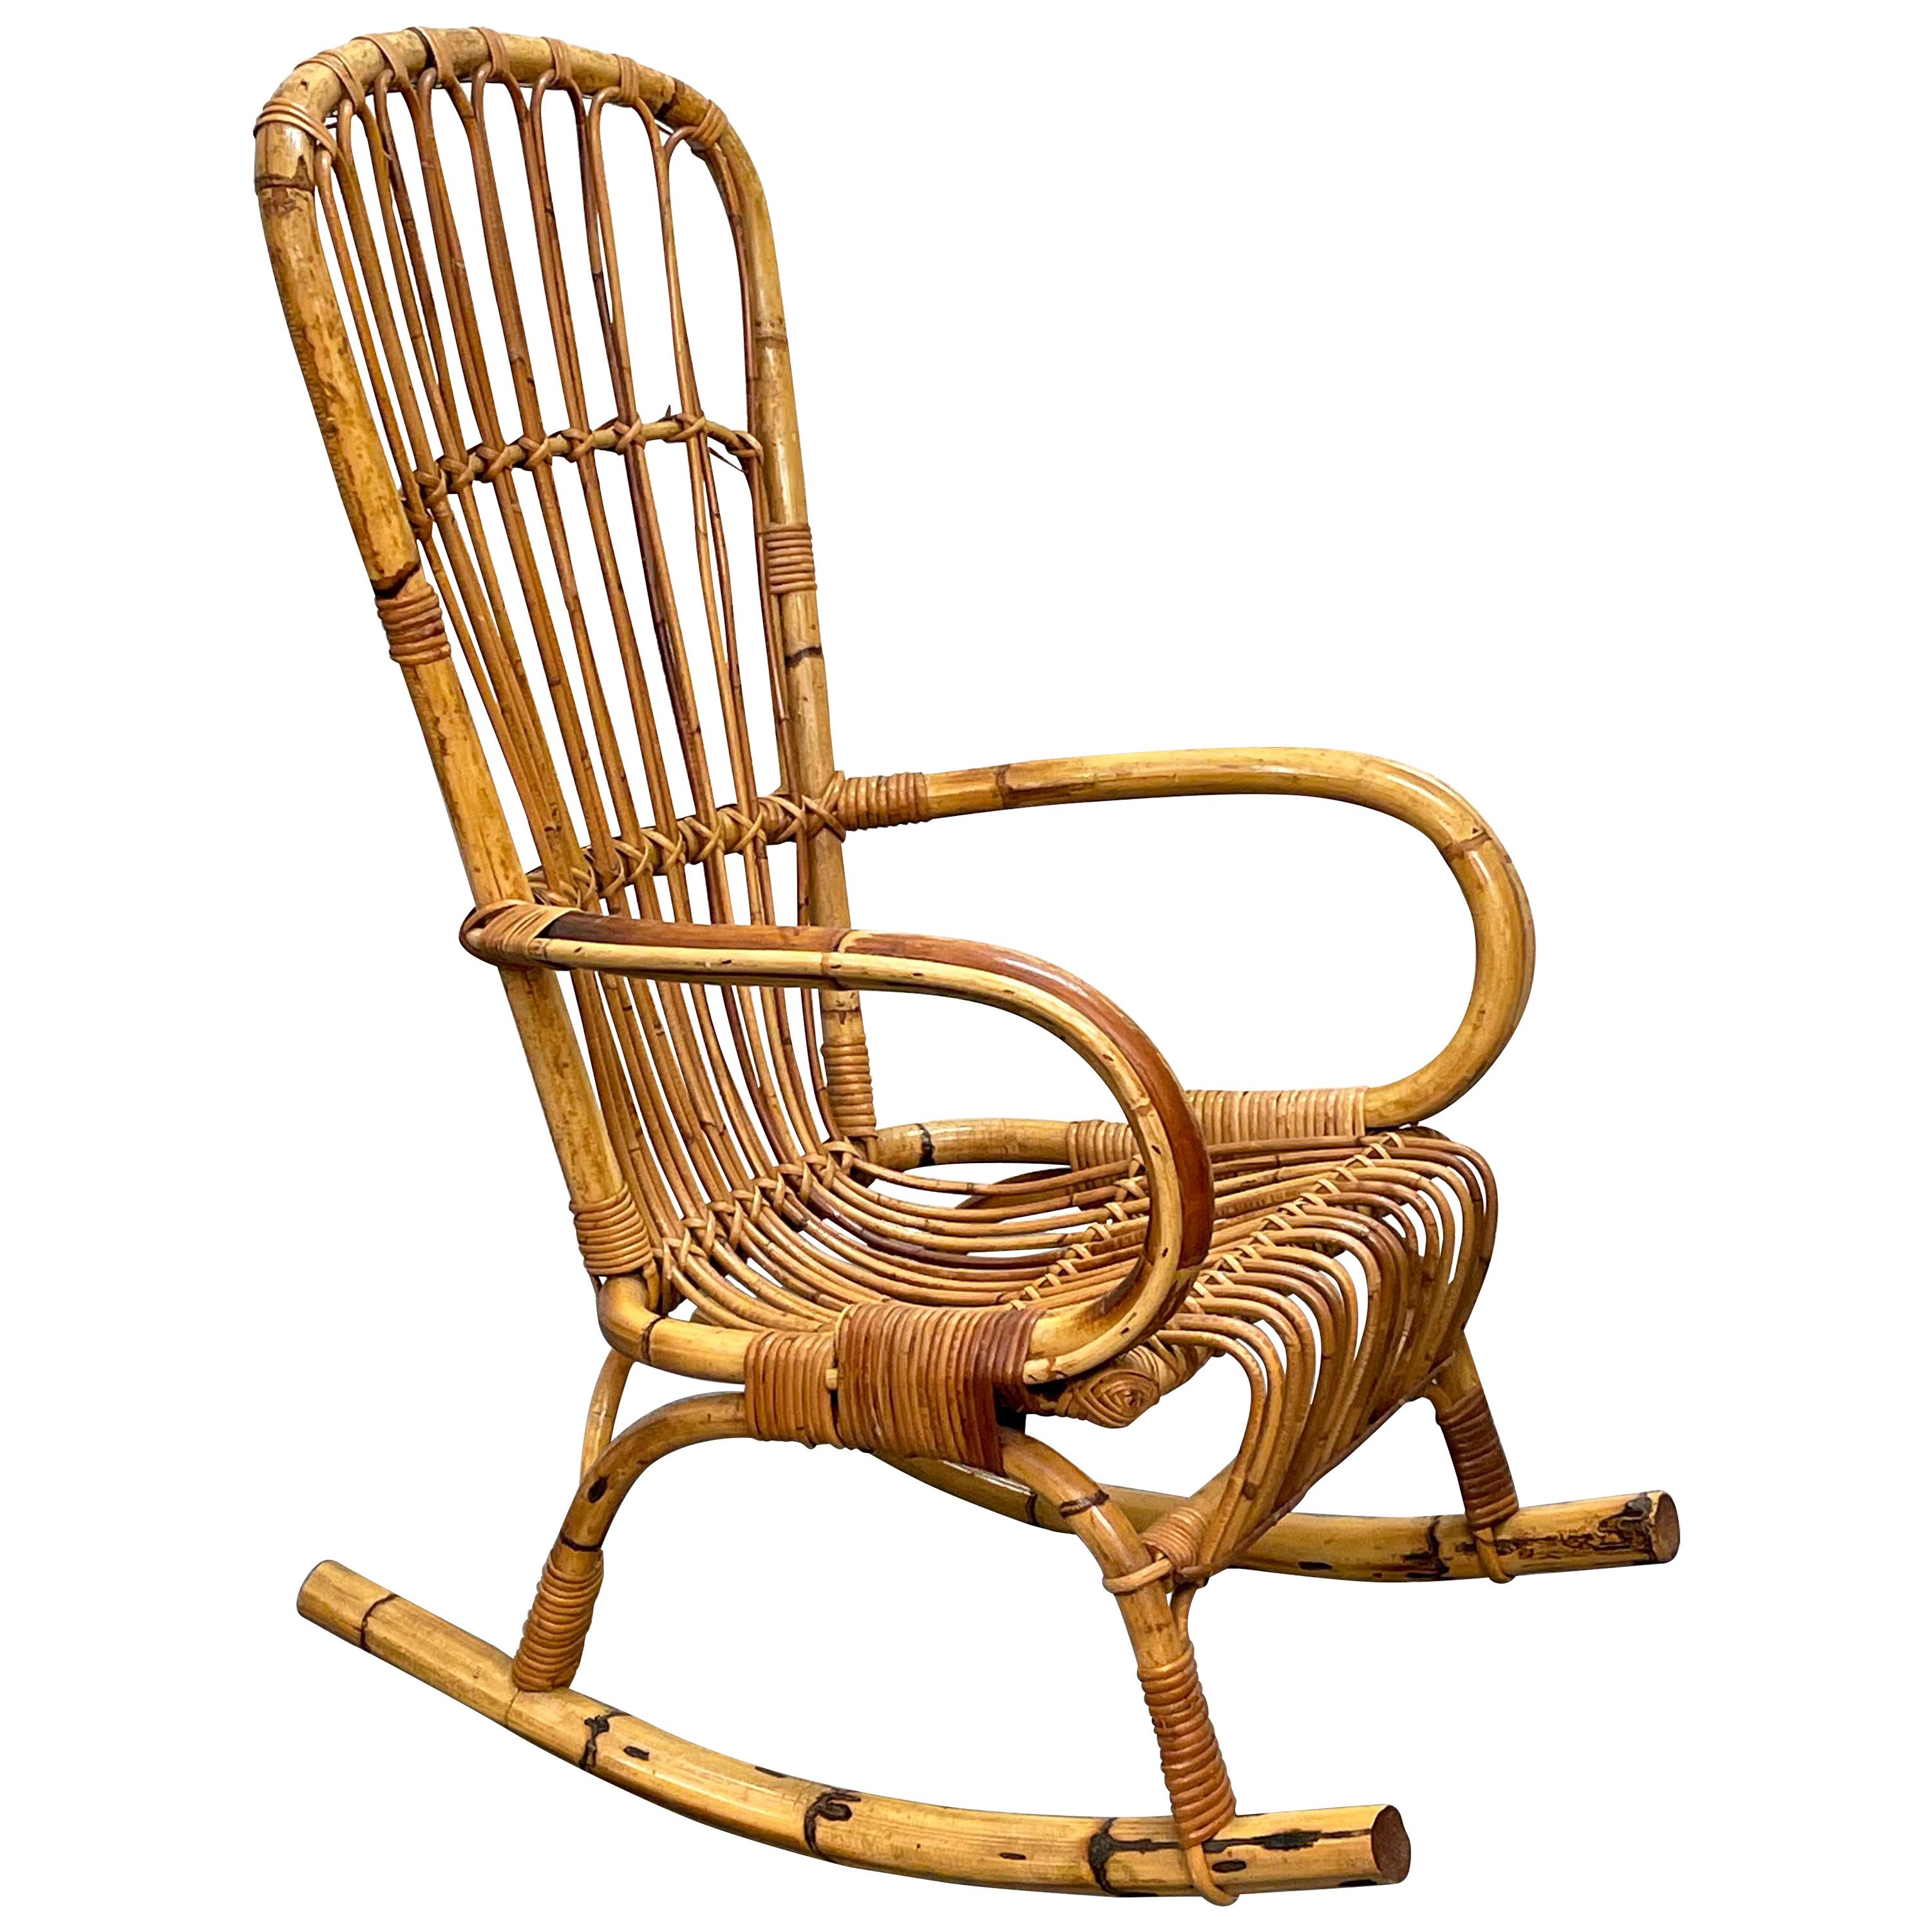 Midcentury French Riviera Rattan and Bamboo Italian Rocking Chair, 1960s